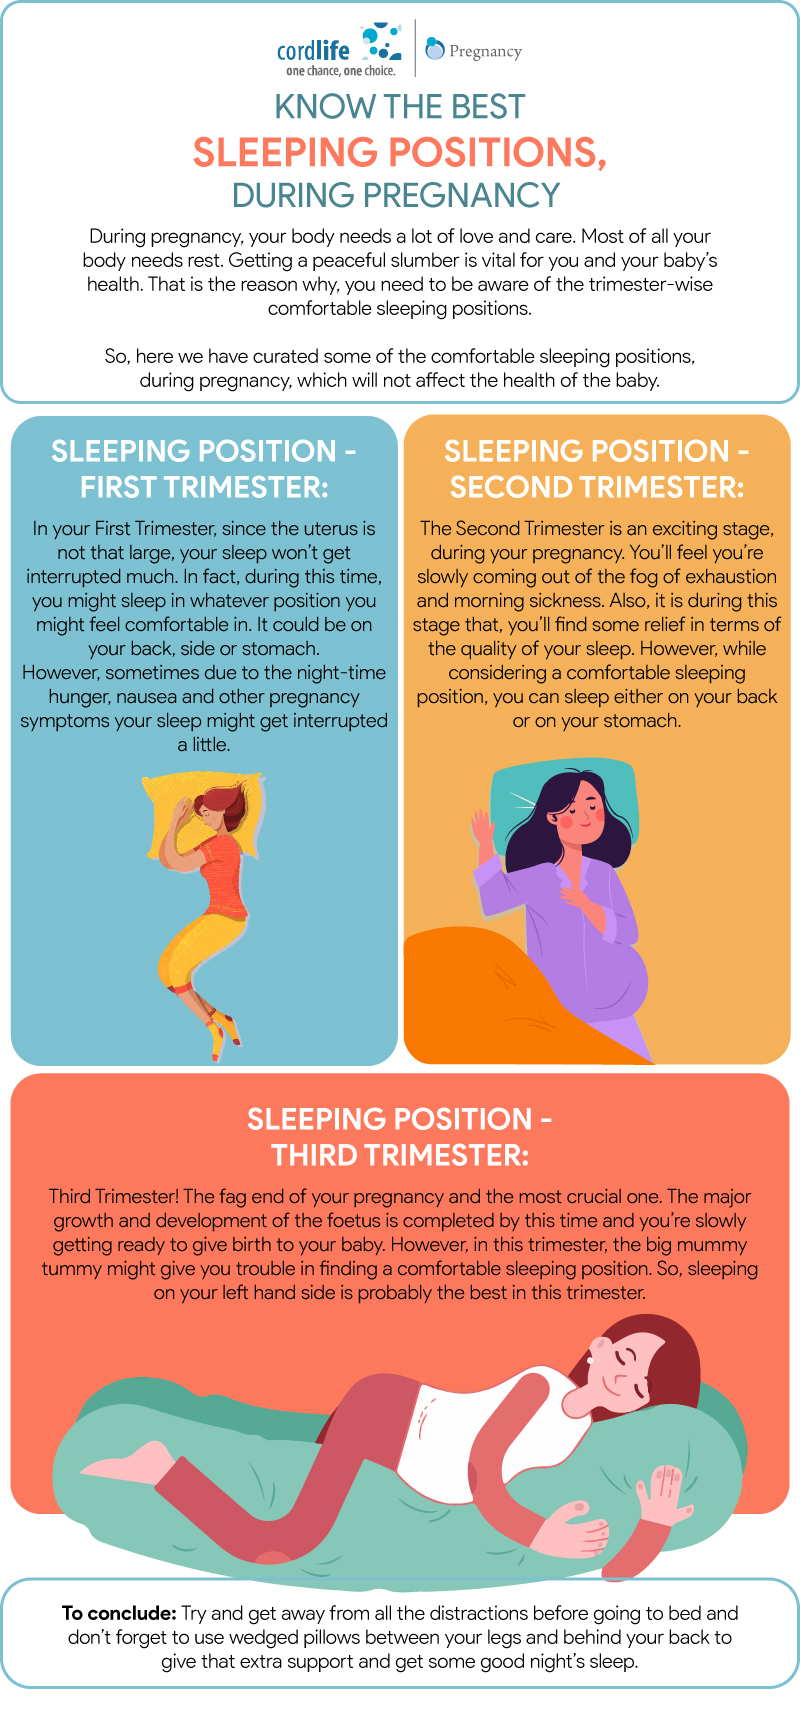 Sleeping Positions During Pregnancy: What's Safe And What's Not